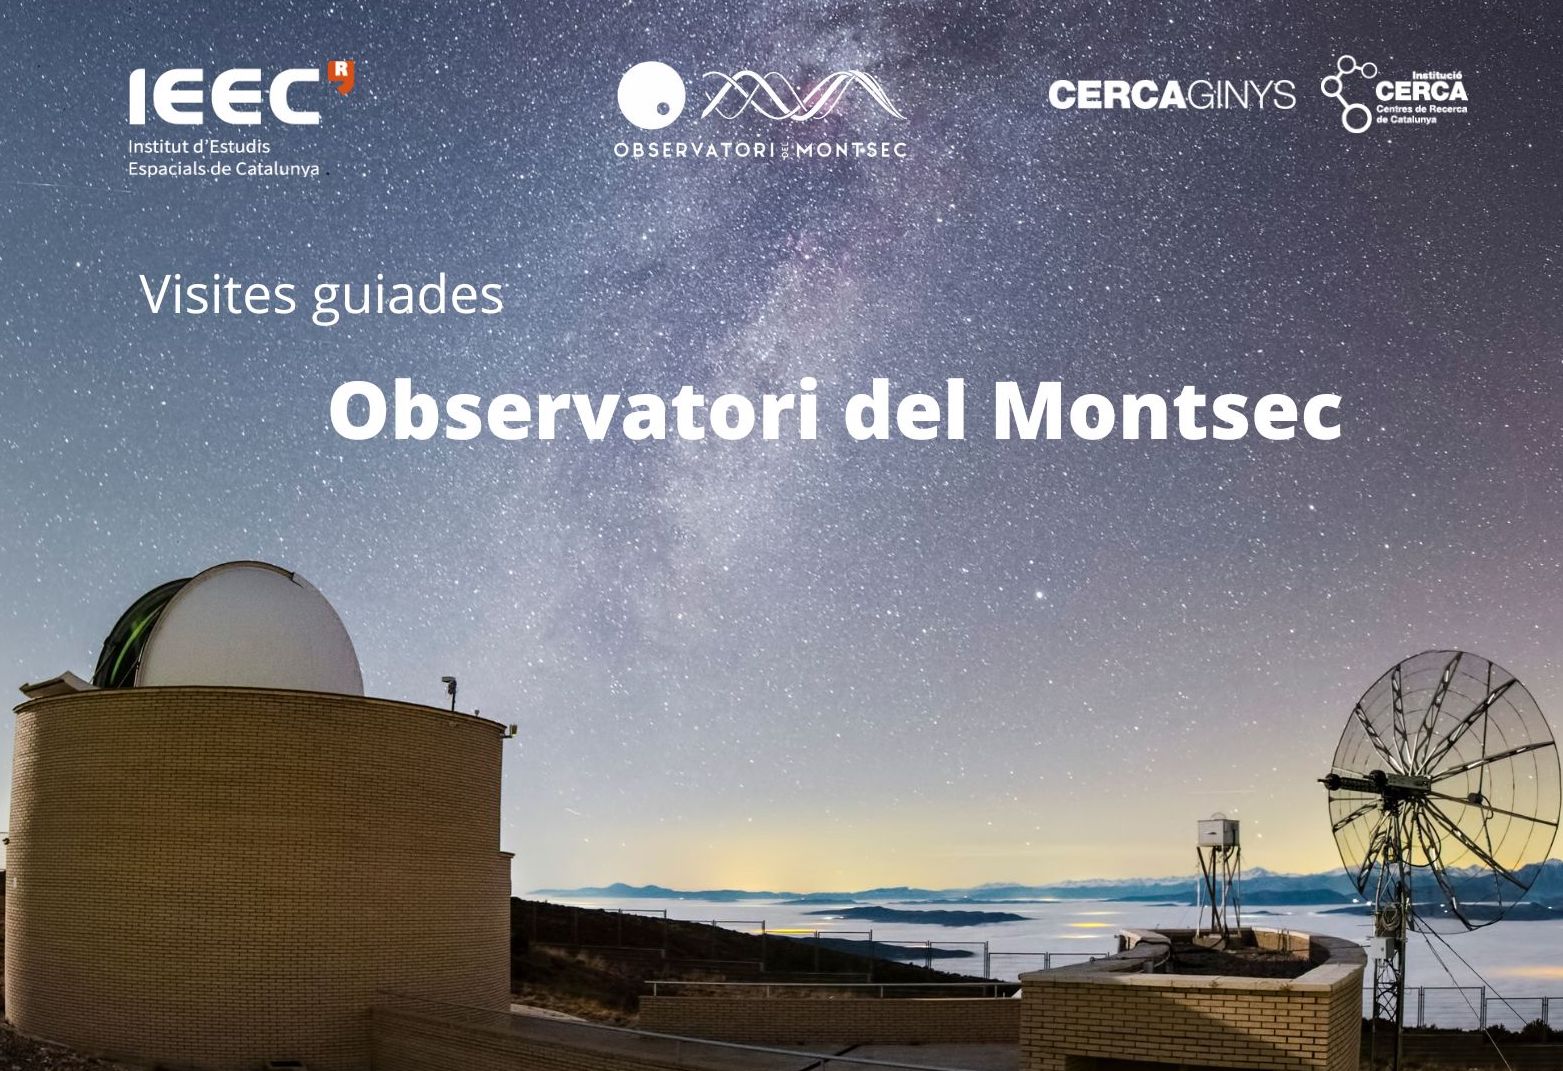 Guided tours to the Montsec Observatory are back